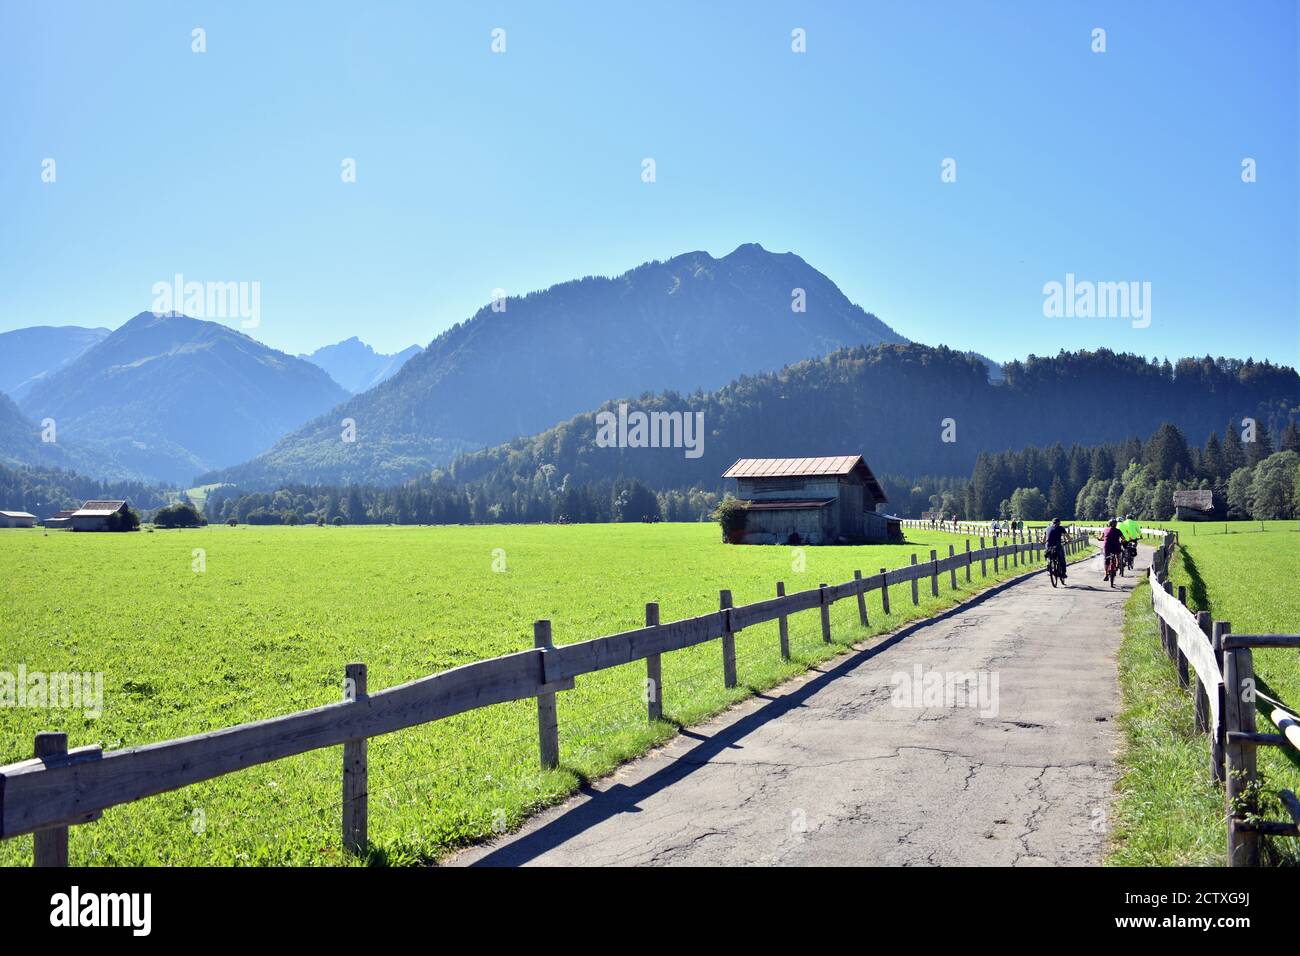 cyclers cycling on Alp mountains in a sunny day ner green field at Oberstdorf Germany Stock Photo